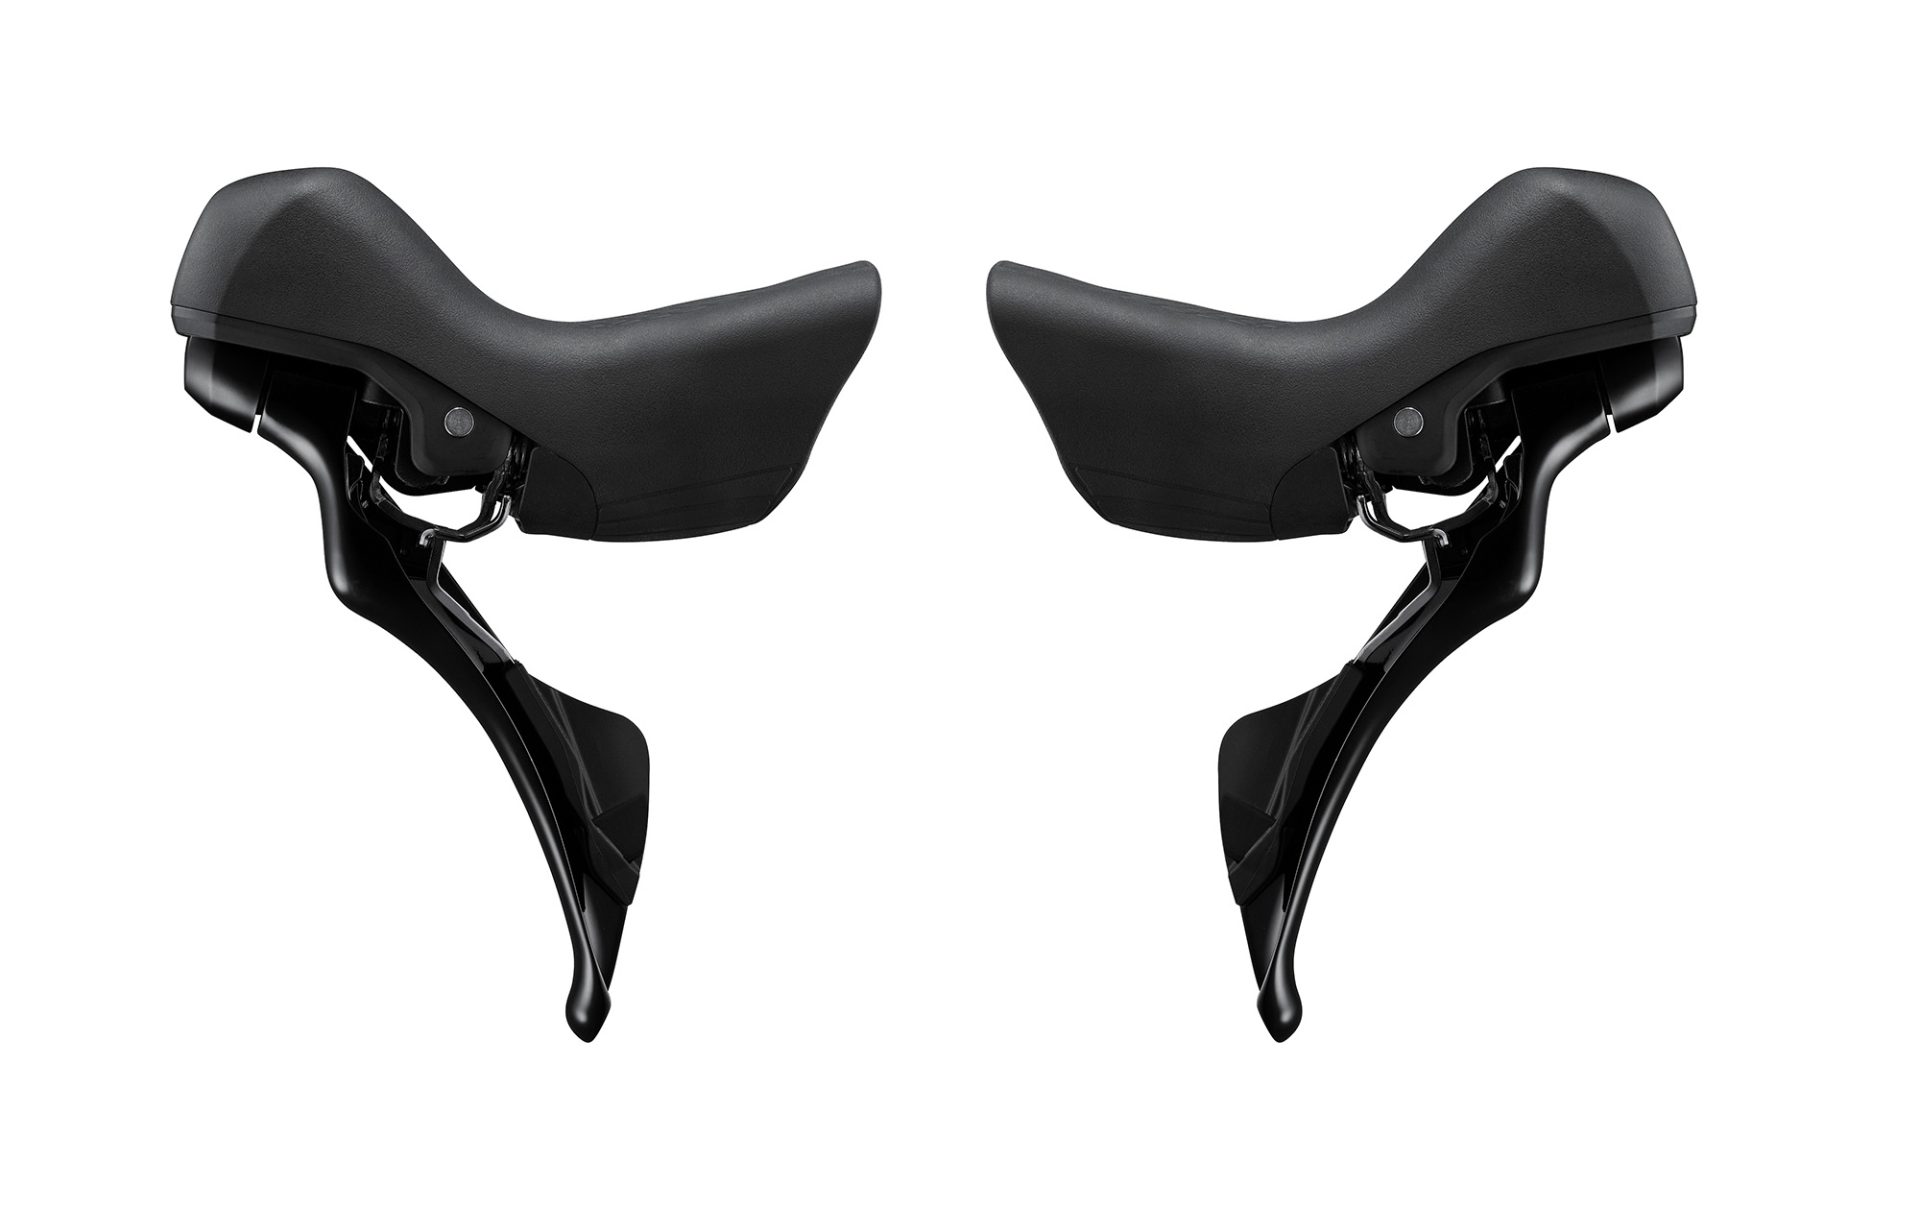 New 105 mechanical levers in profile.